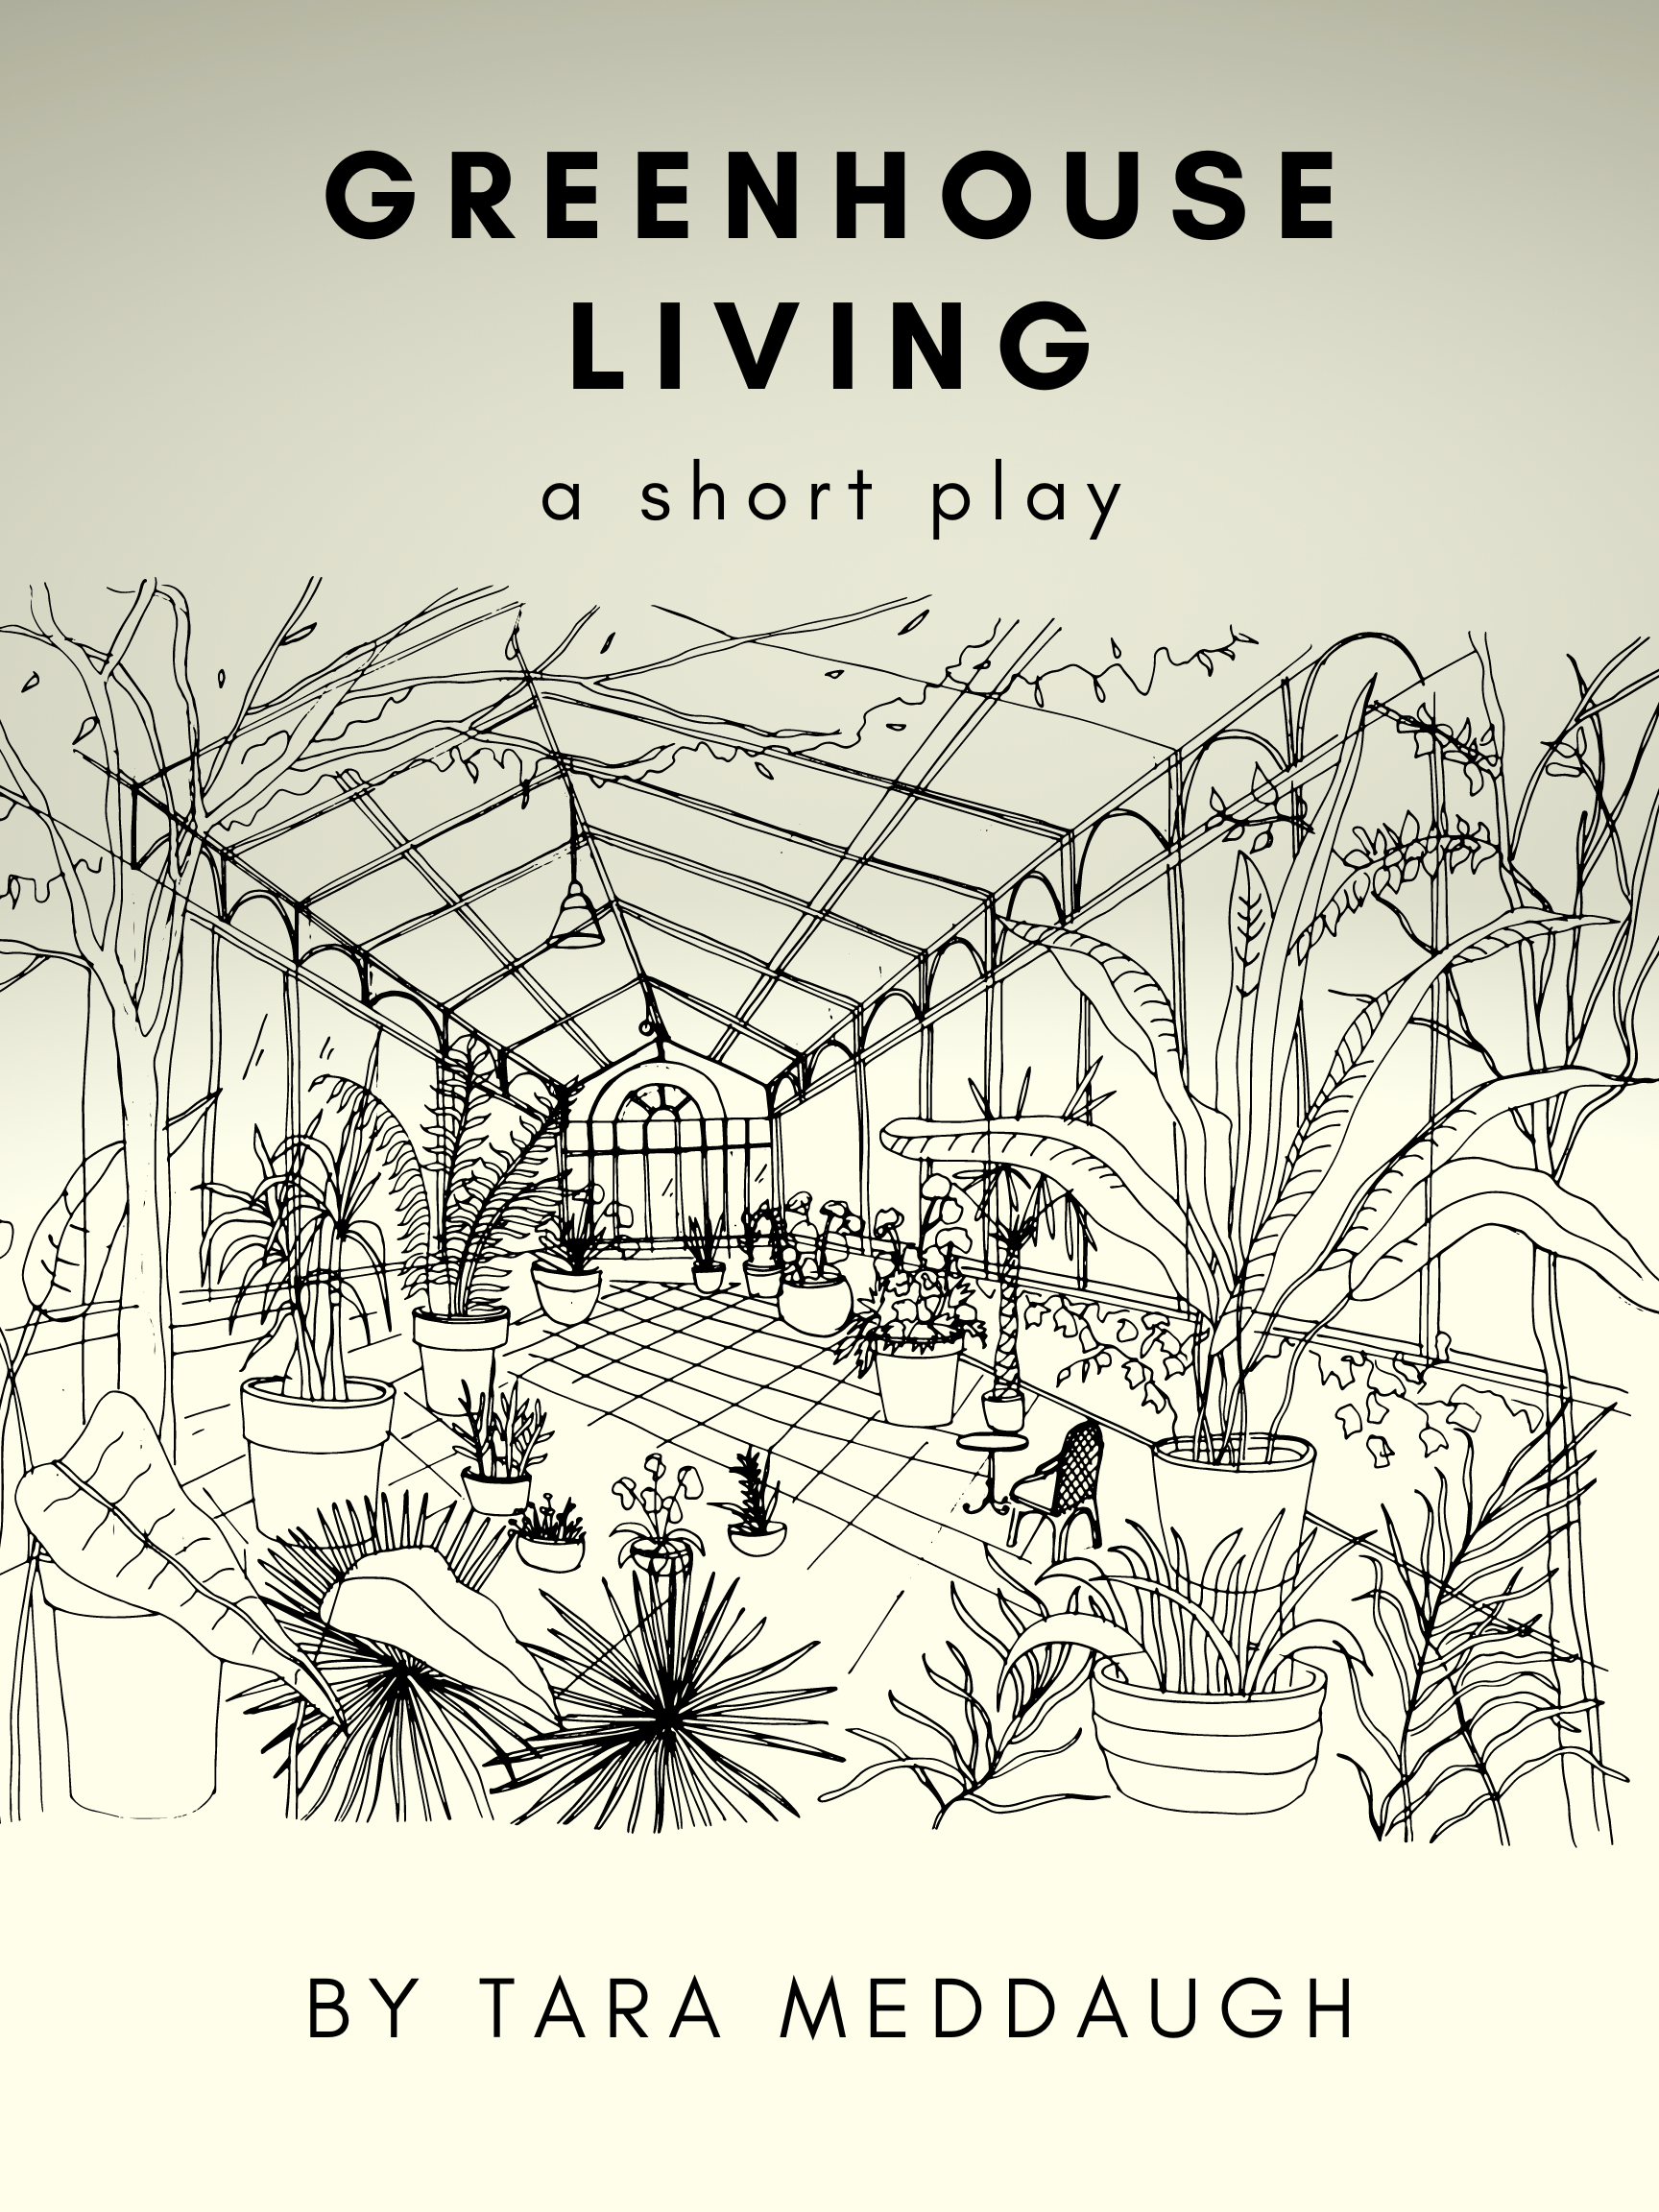 Greenhouse living (1).png